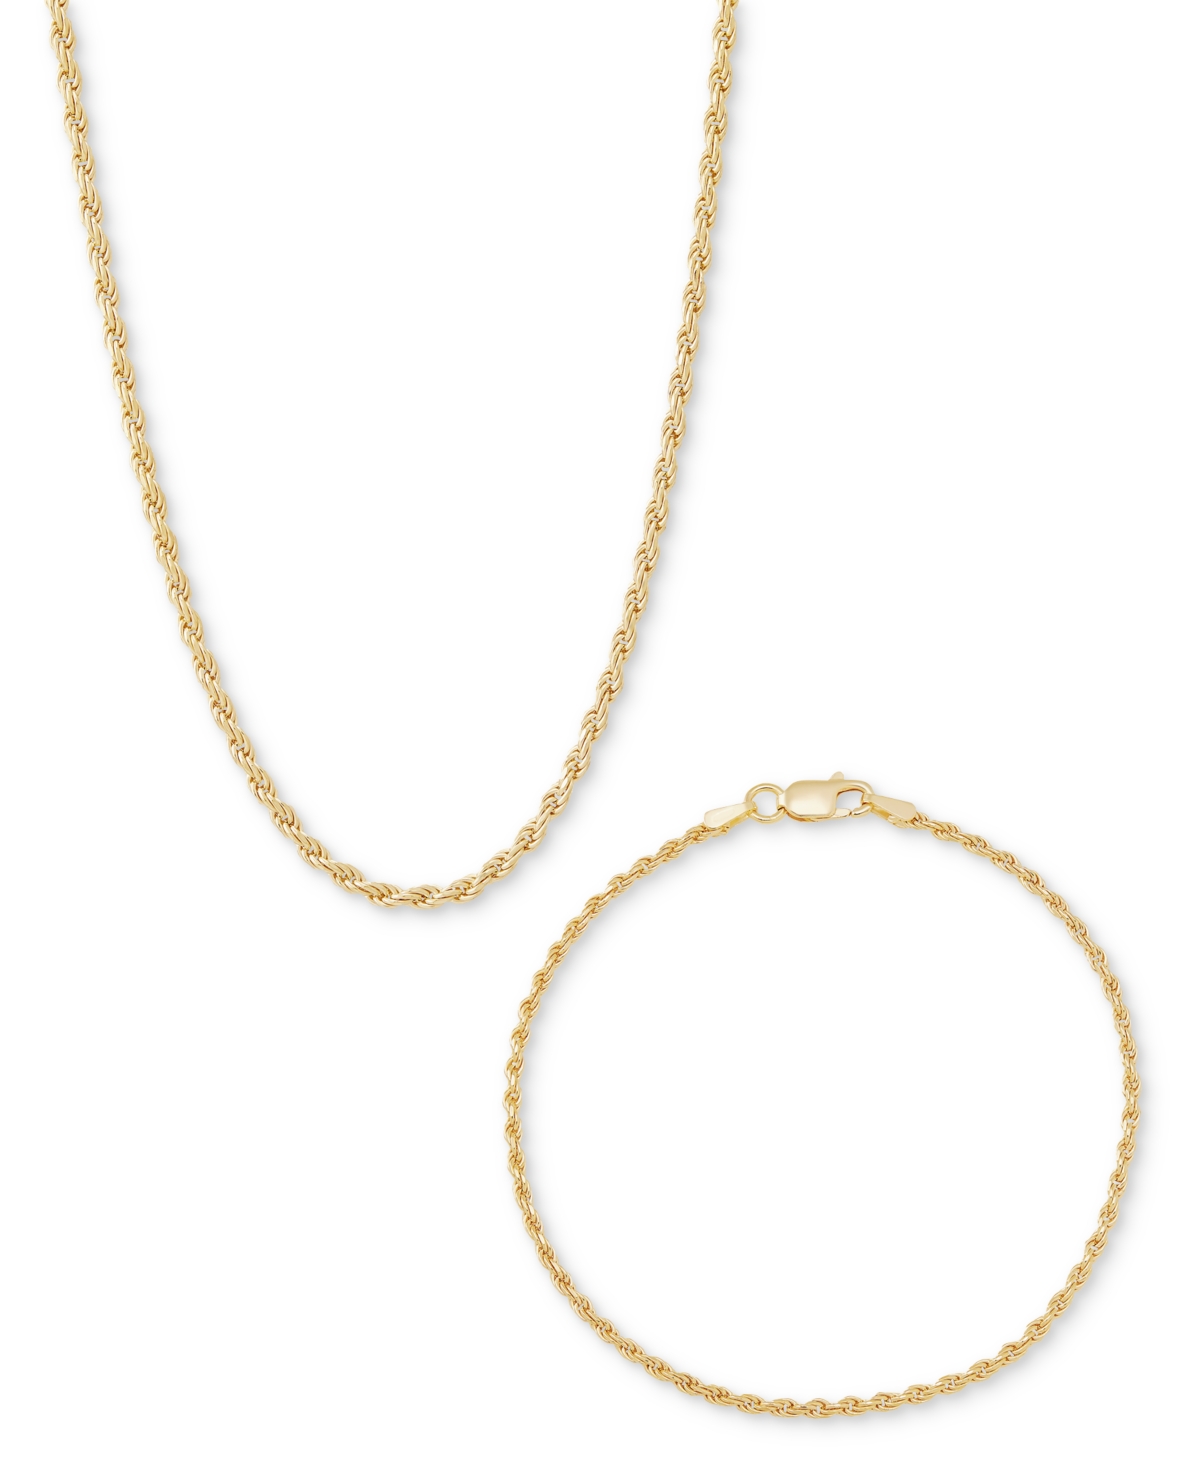 Italian Silver 2-pc. Set Polished Rope Link Collar Necklace & Matching Bracelet In Gold Over Silver